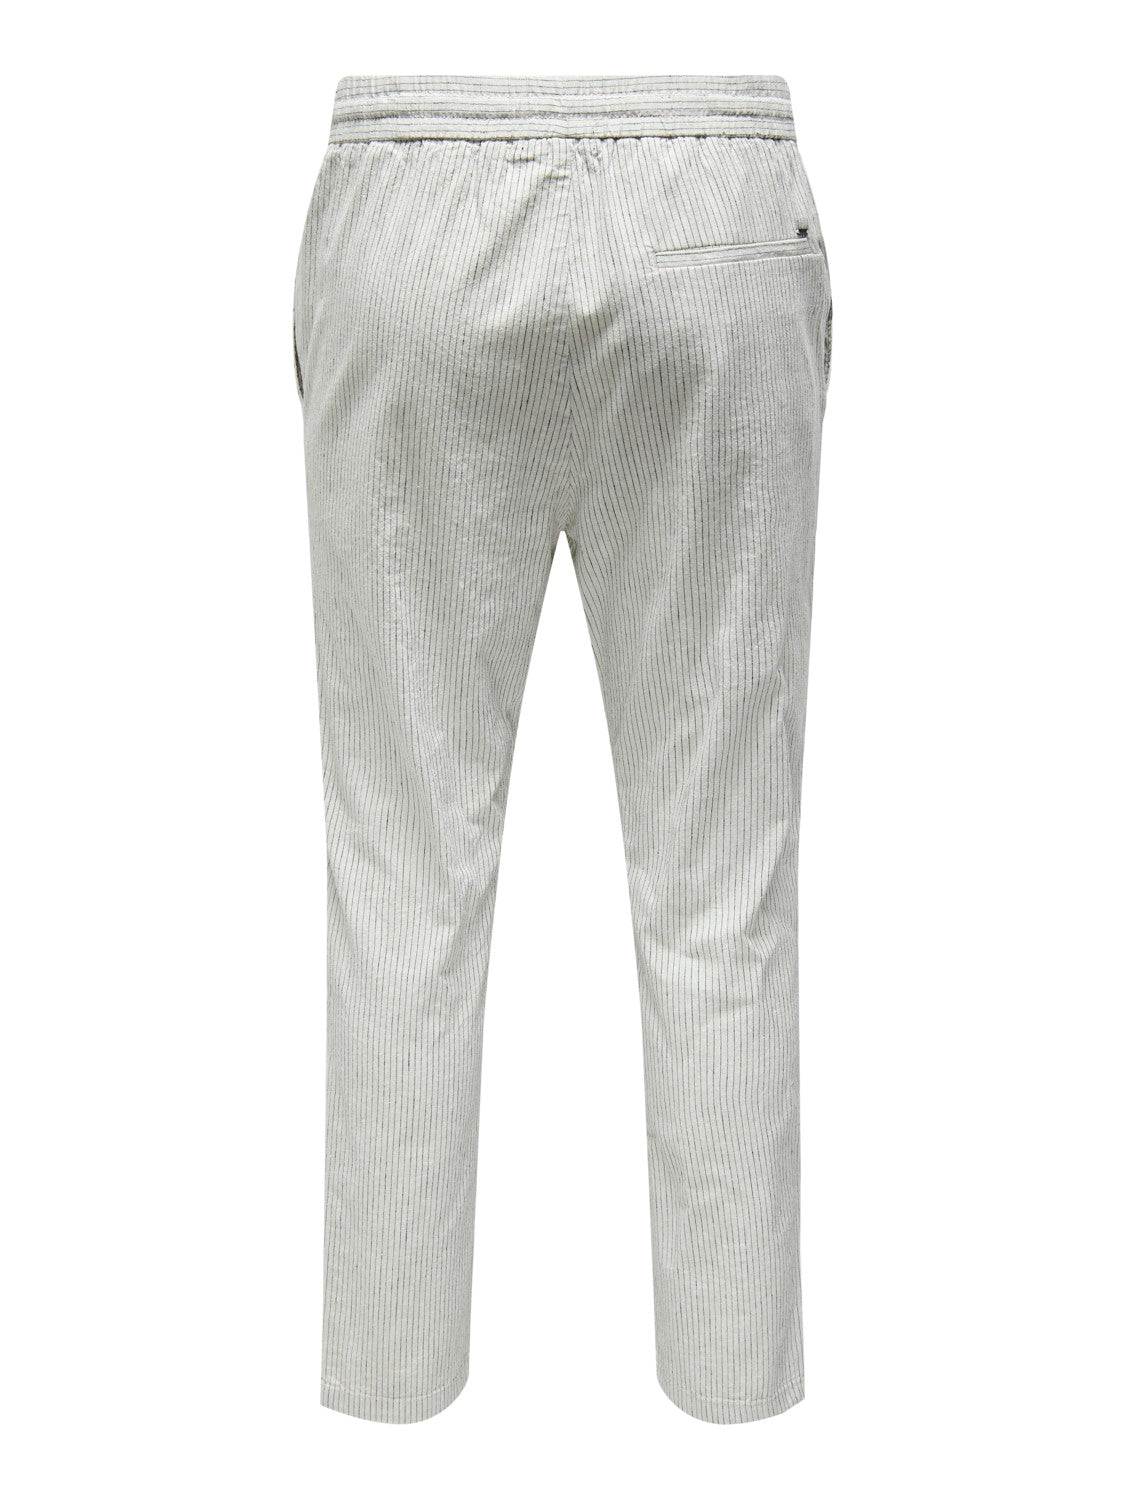 ONLY & SONS PANTALONE RIGATO IN LINO COTONE - Moonstruck